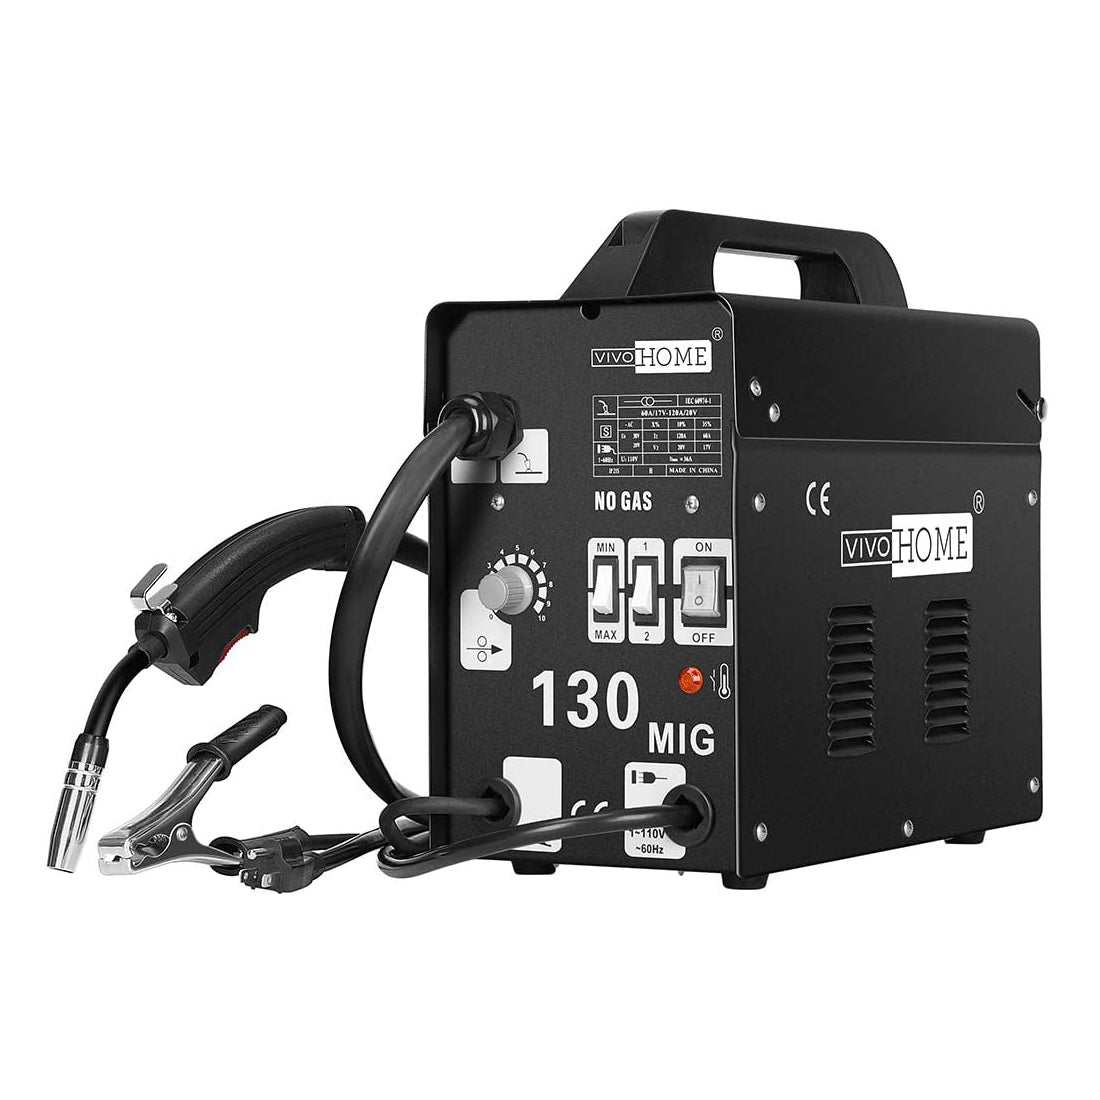 Powerful and Innovative soldadora mig for Welding –